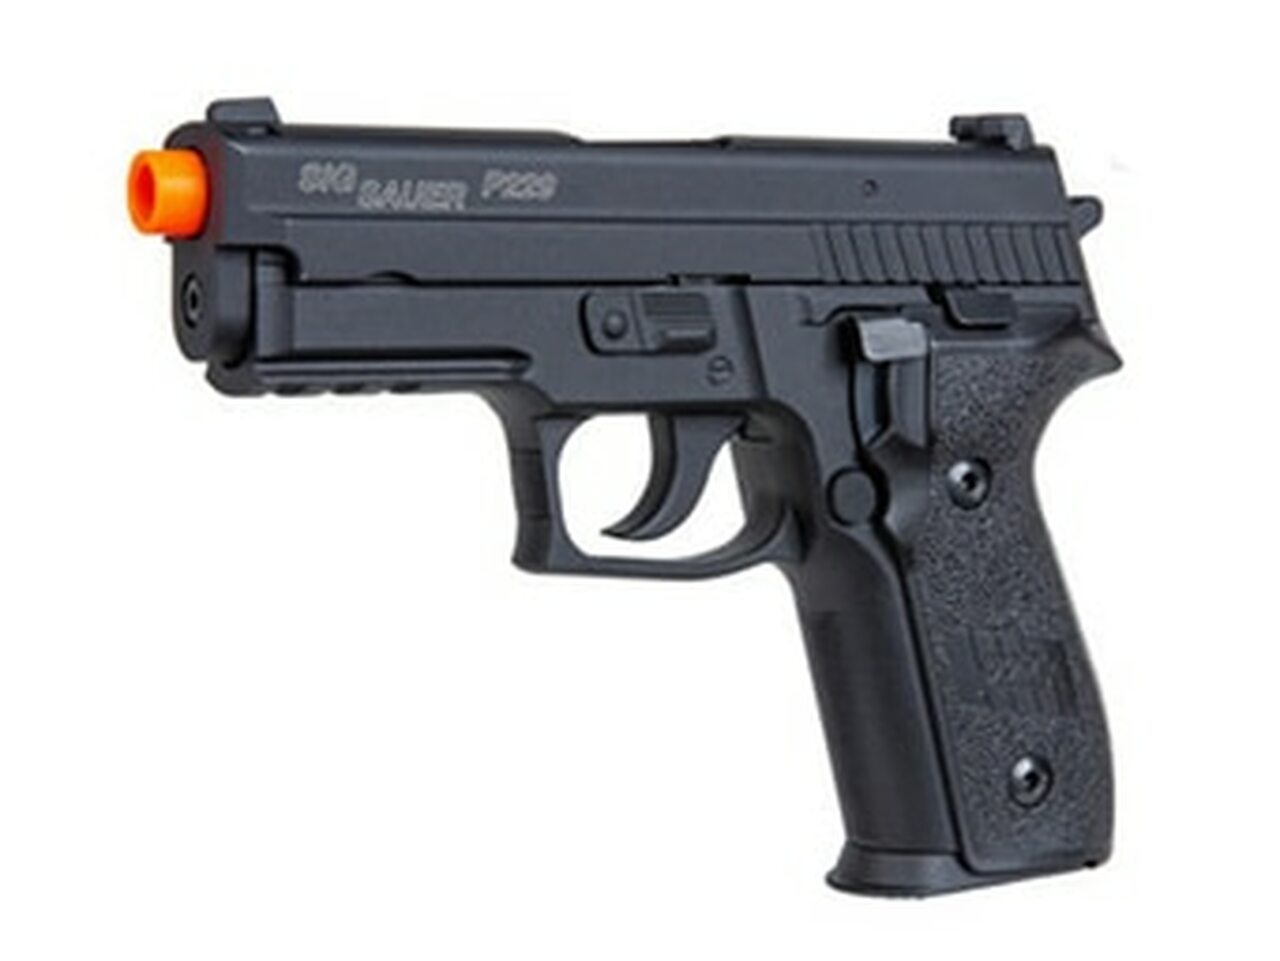 Image of Sig Airsoft Proforce P229, 6mm, 4.75", 25rd, Green GAS Power Source, Black